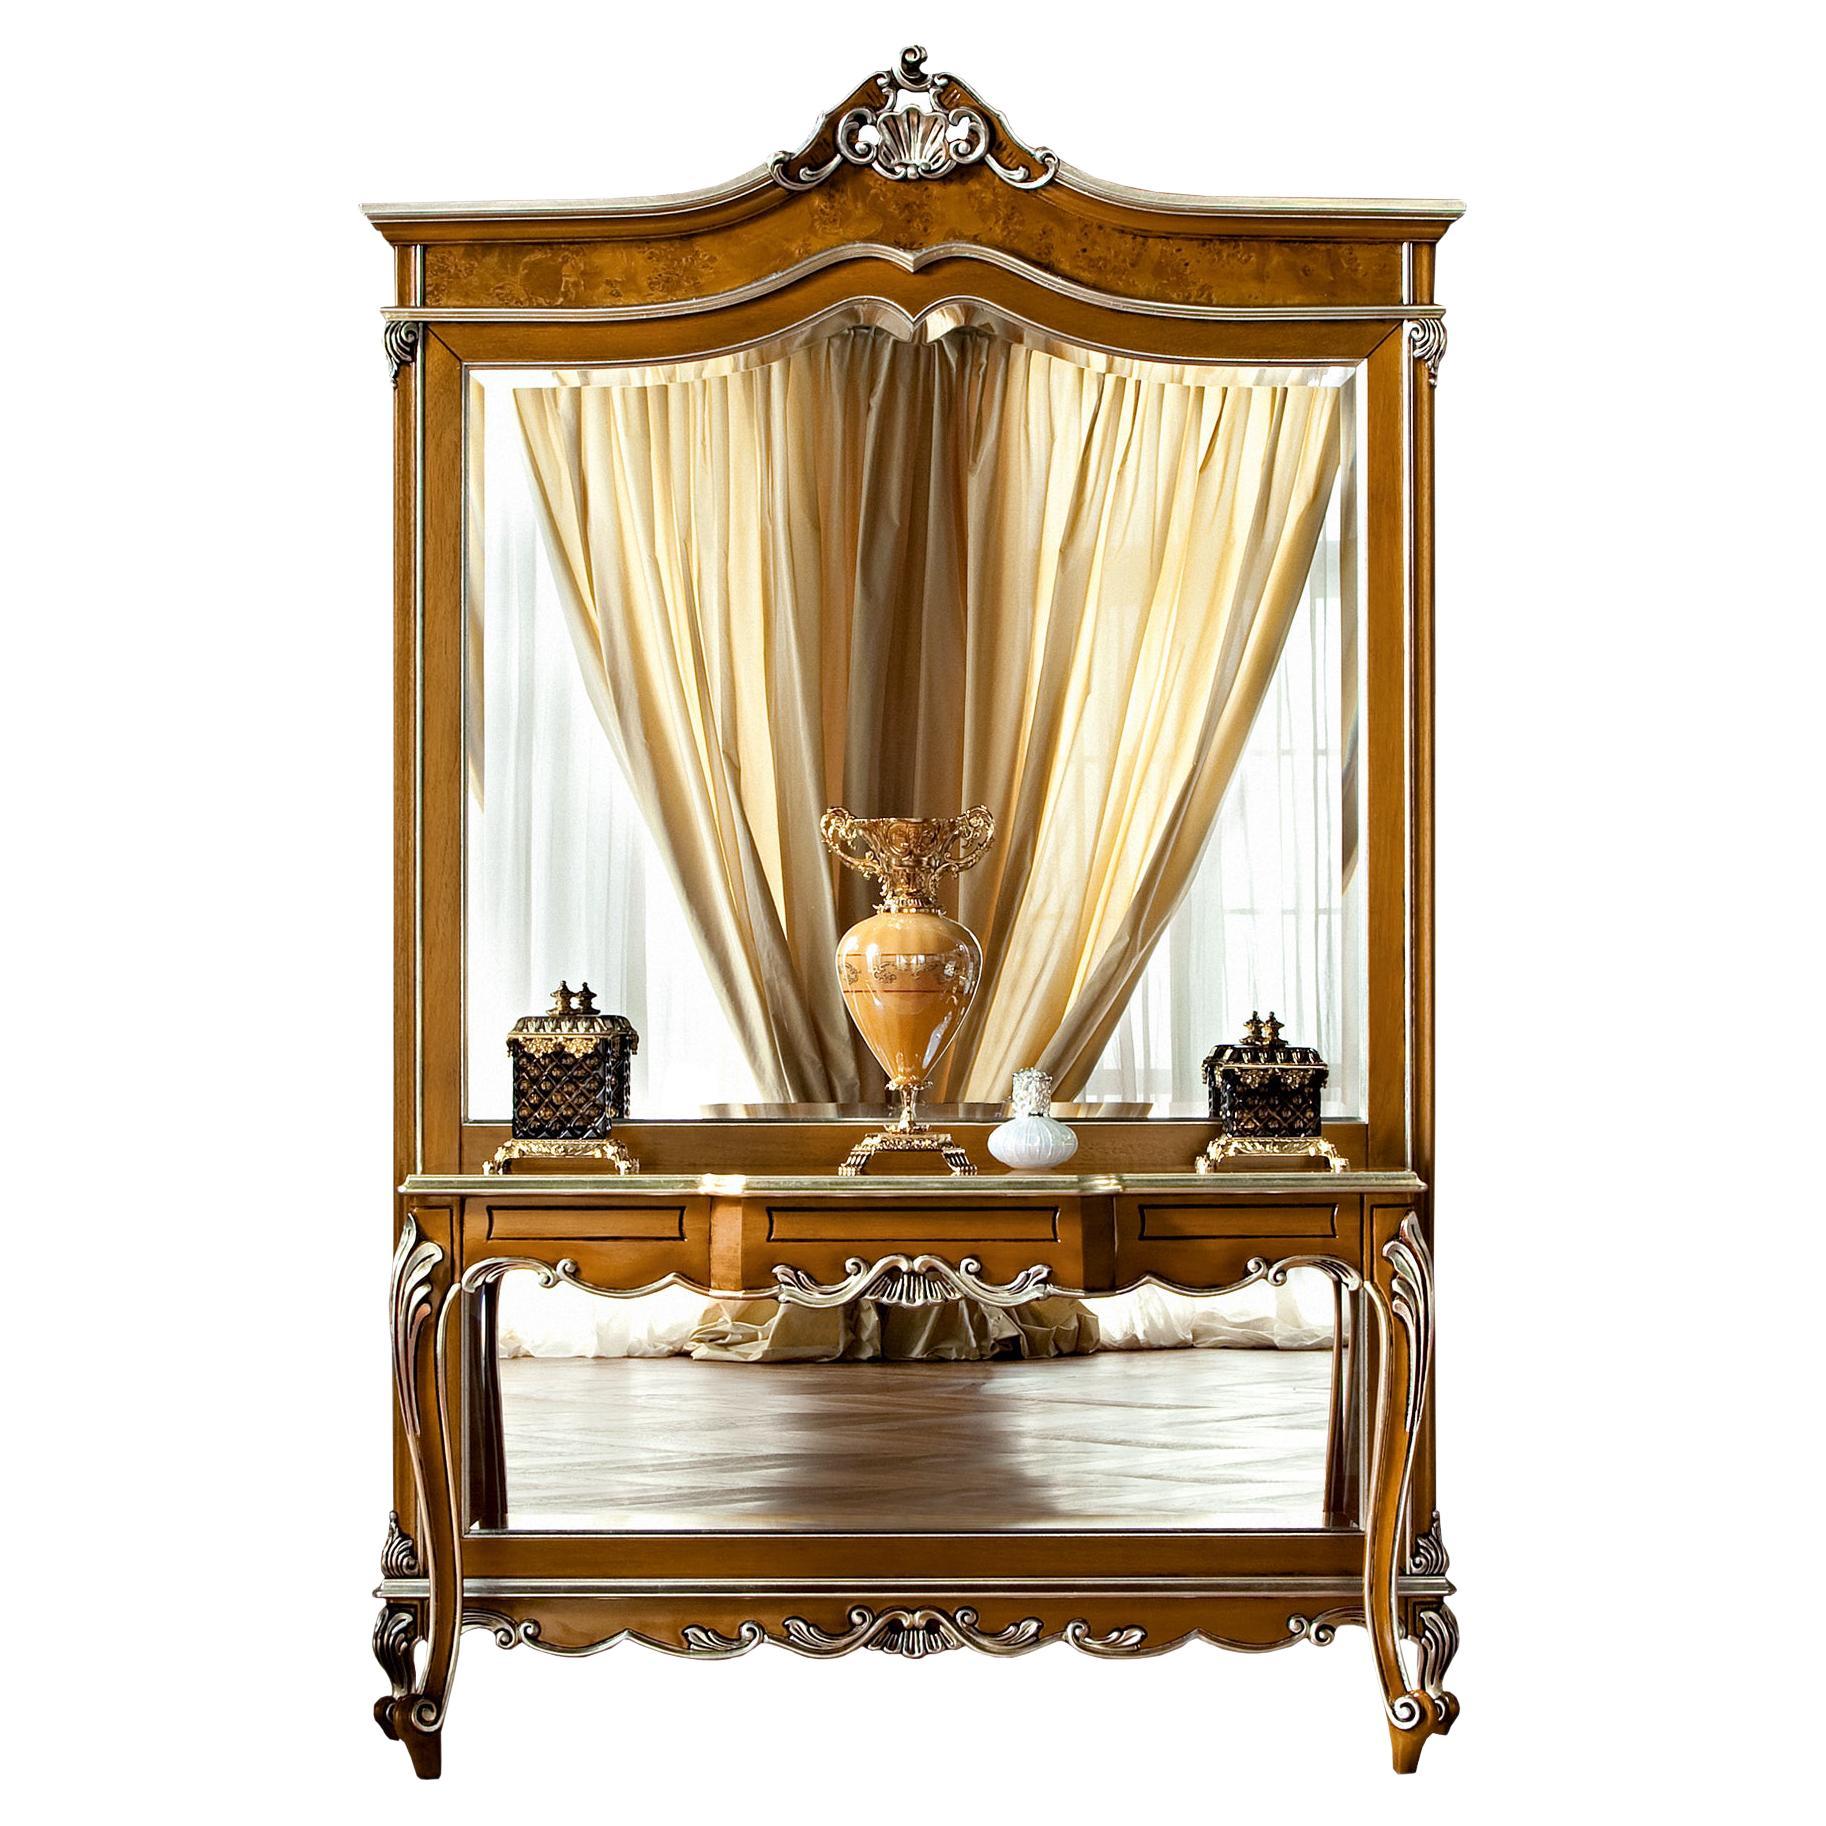 Neo-Classical Natural Walnut Finish Console with Silver Leaf Decorations For Sale